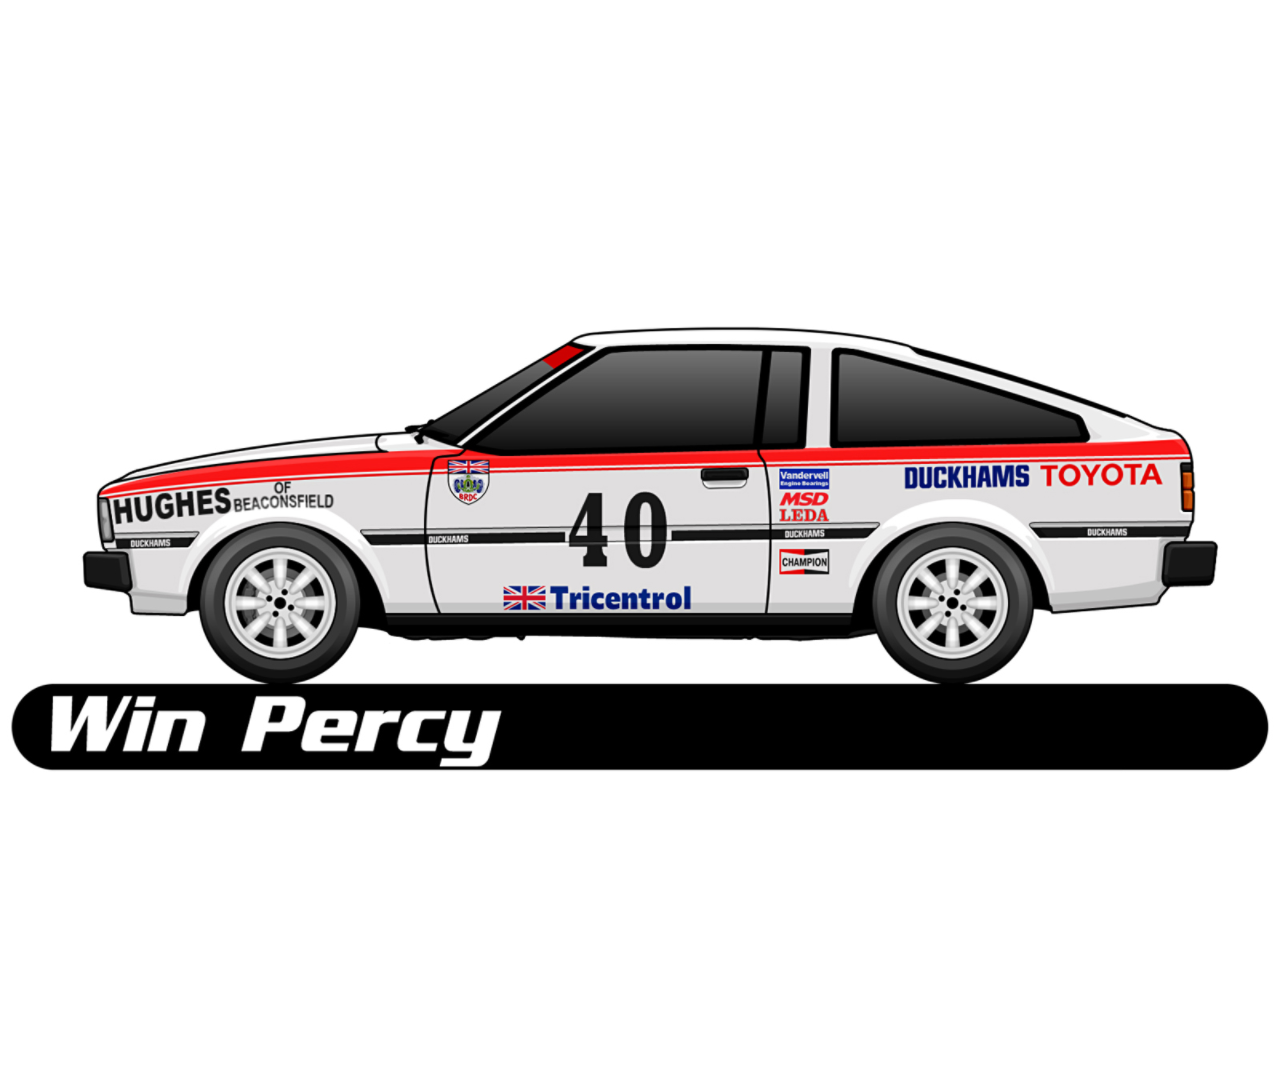 1982: Percy’s clean sweep